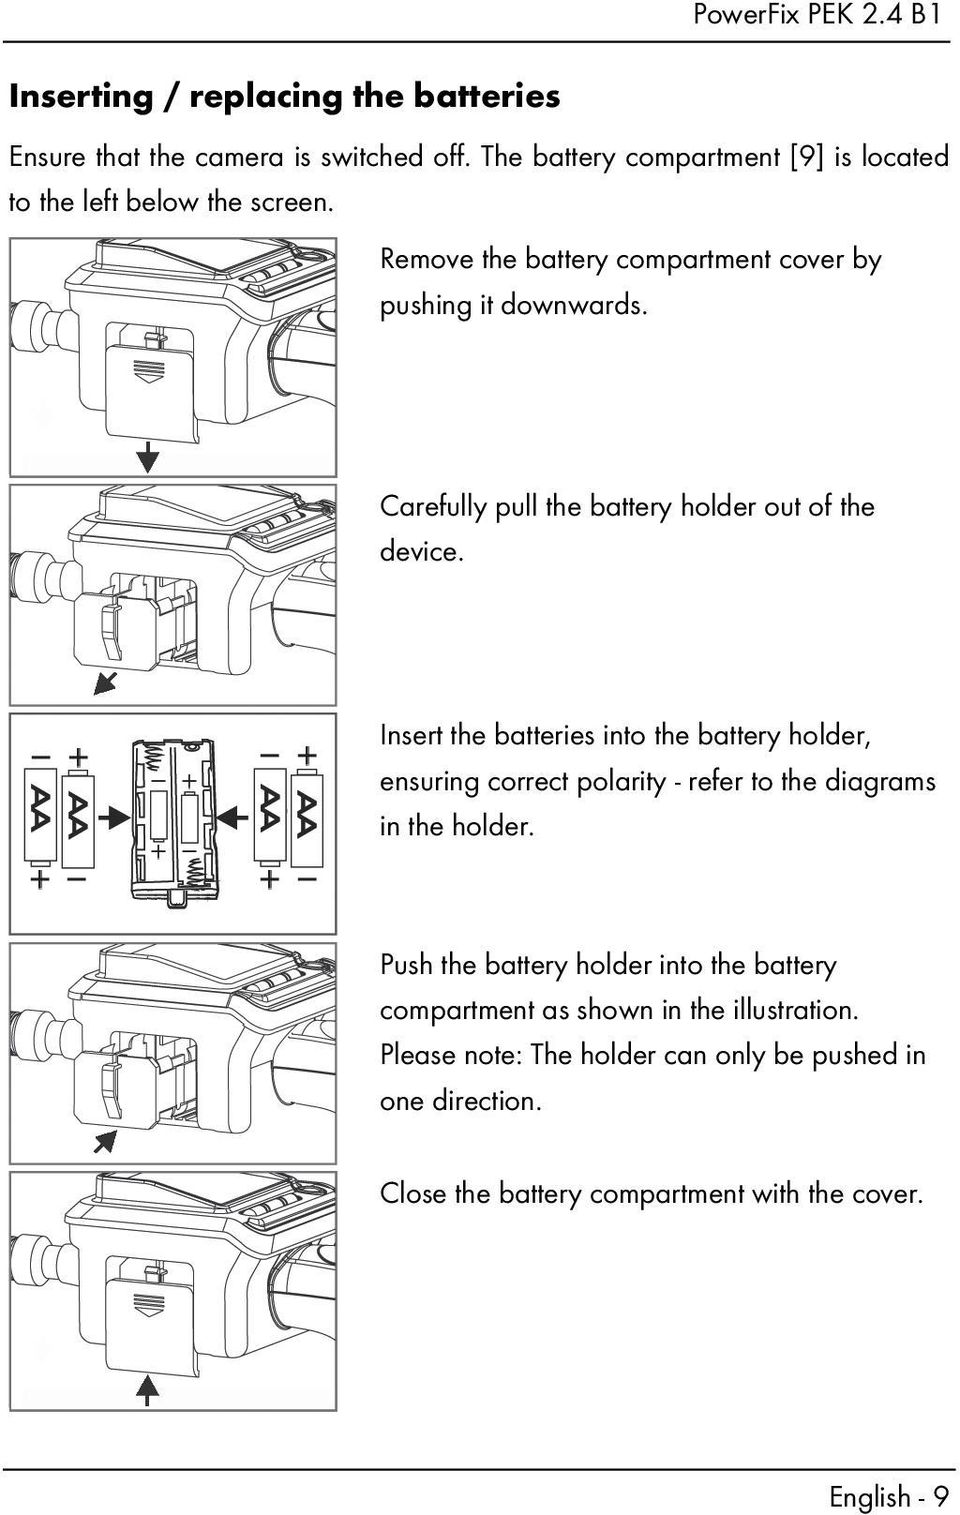 Carefully pull the battery holder out of the device.